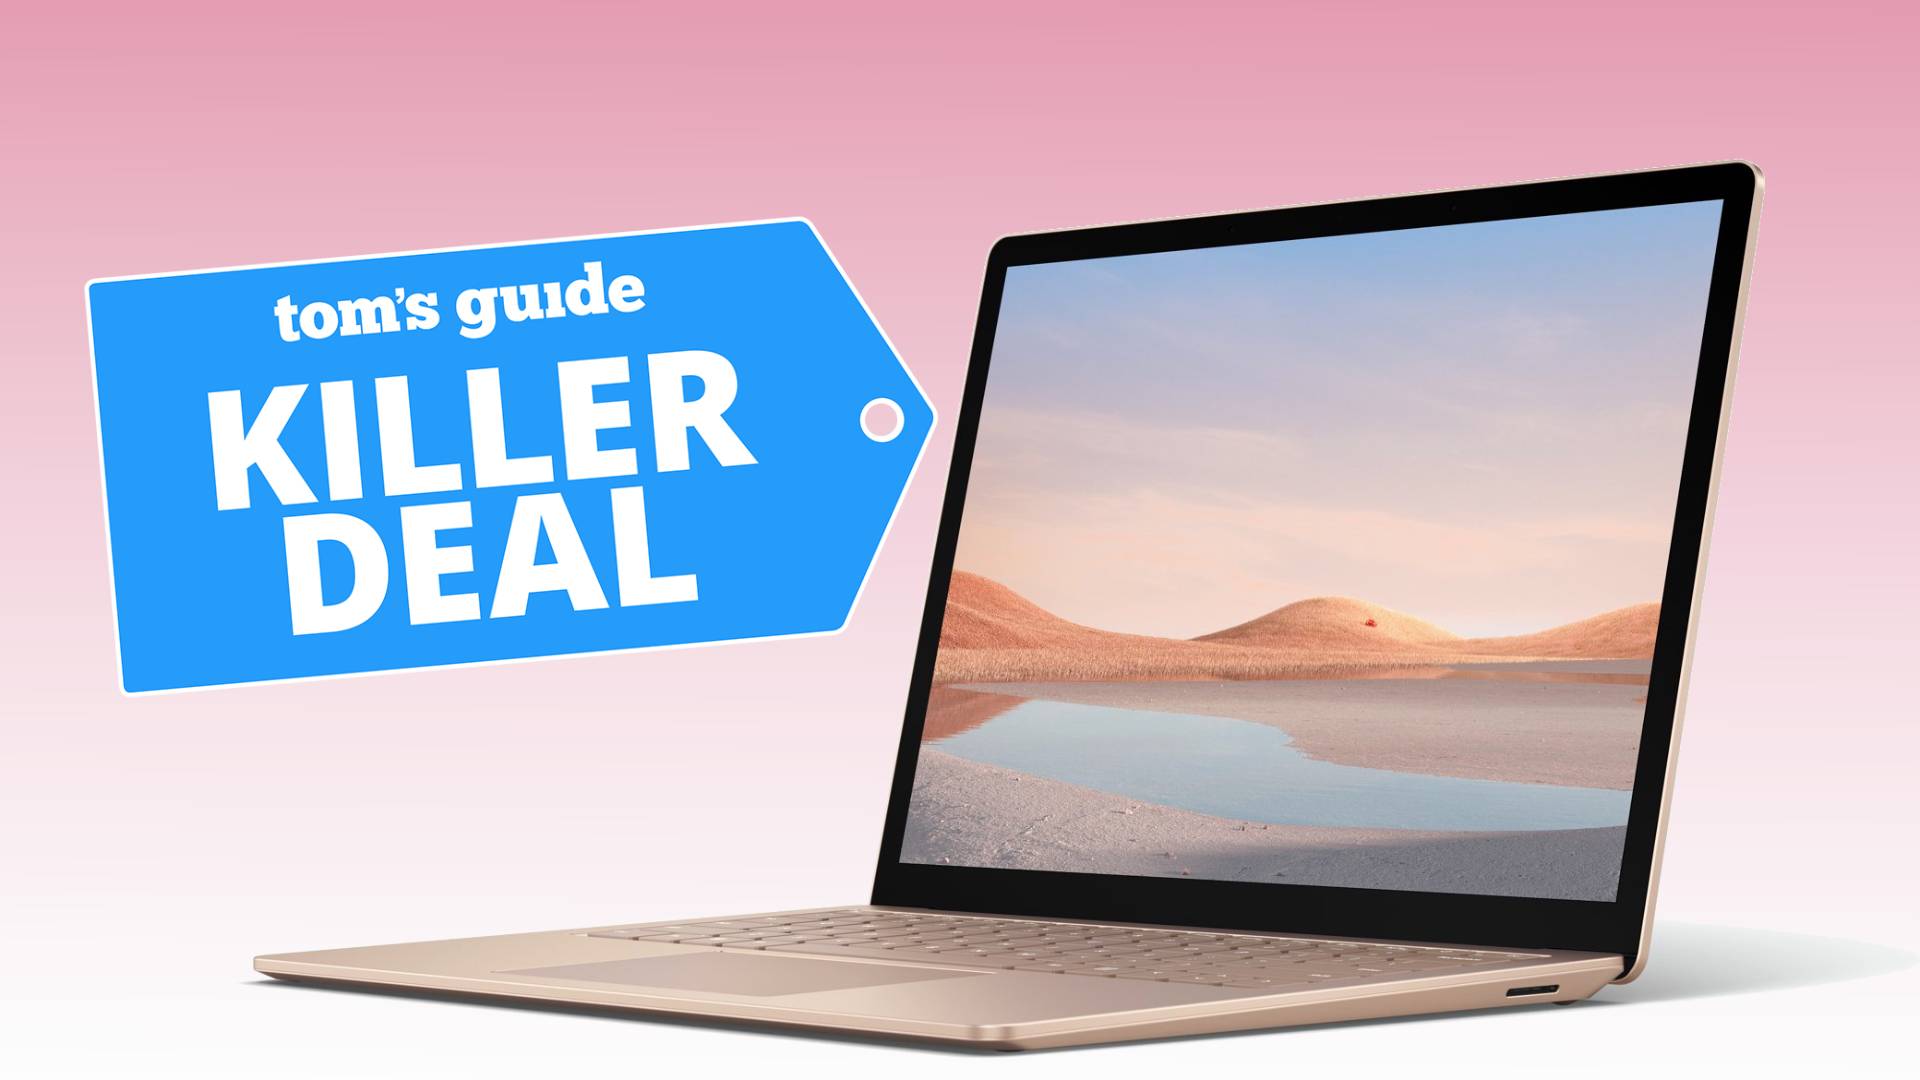 A Microsoft Surface Laptop 4 on a pink background. The "Tom's Guide killer deal" tag is overlaid.